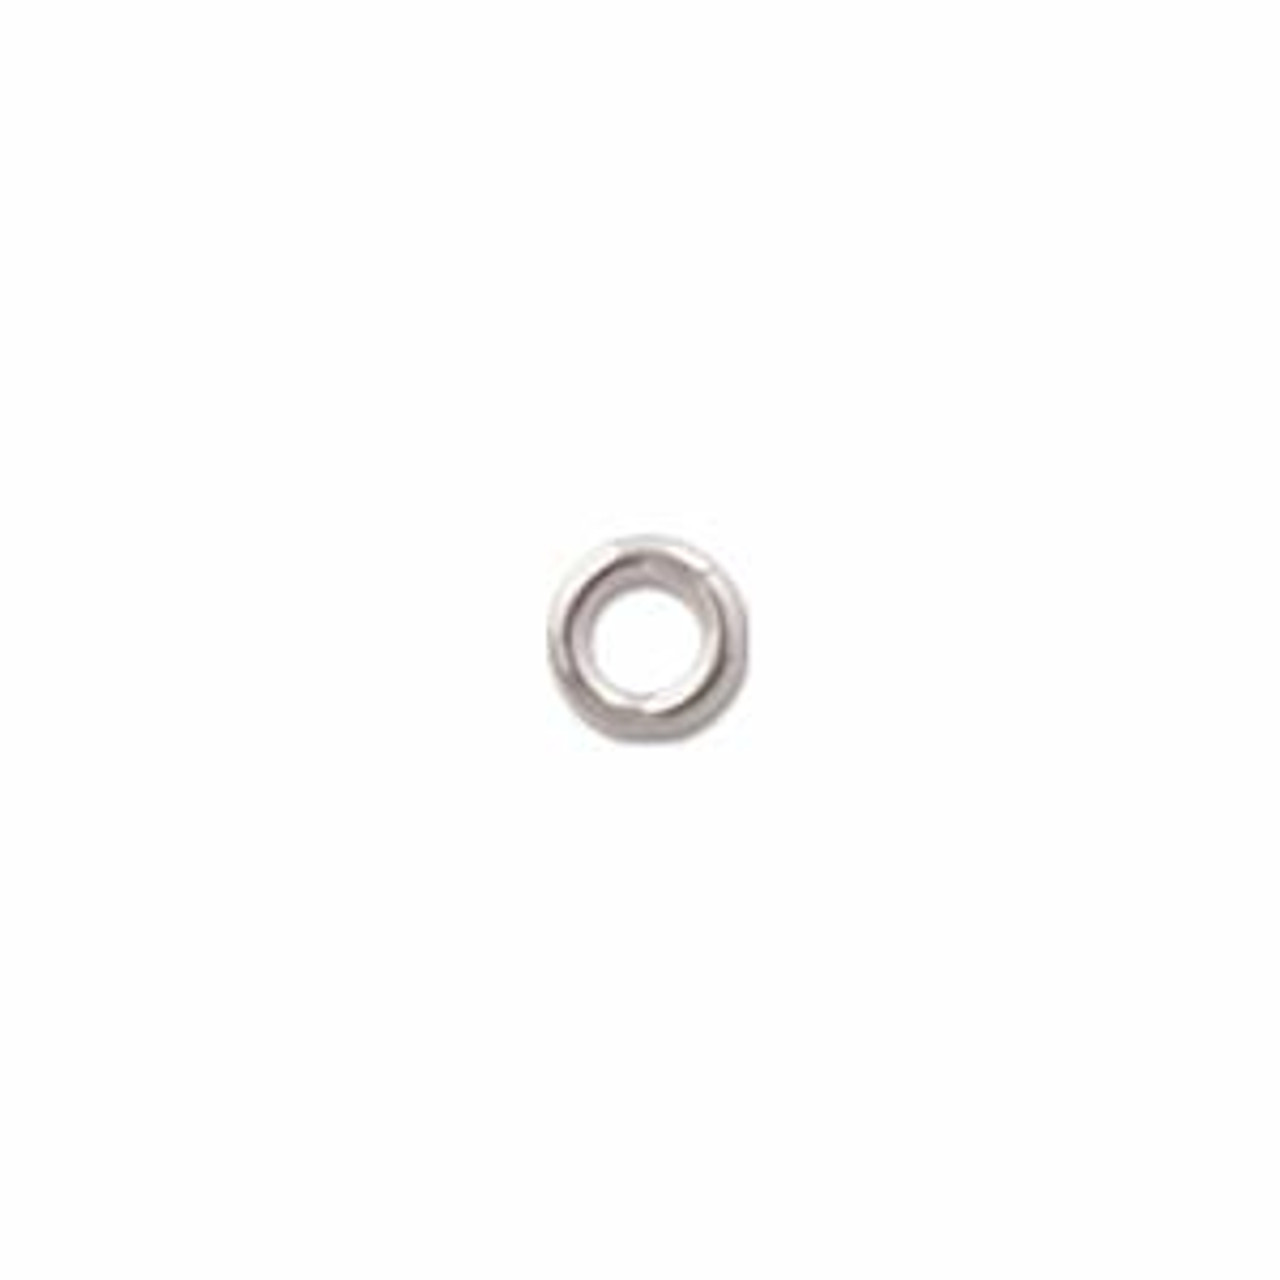 Sterling Silver Open Jump Ring 5mm ~ 20ga ~ Pack of 10